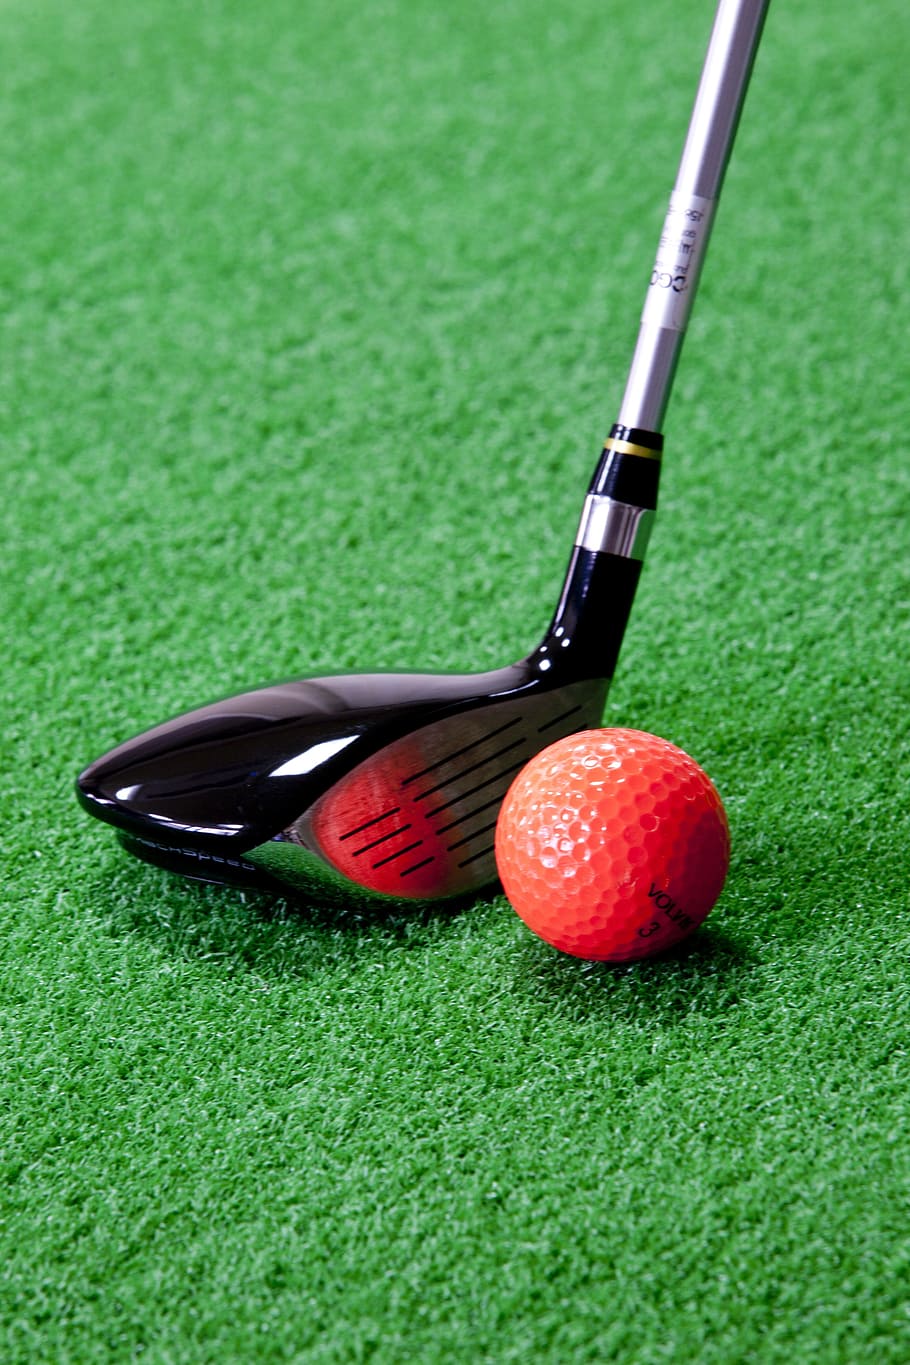 golf, air display provides, driver, red room, exercise, grass, ball, green color, golf ball, sport